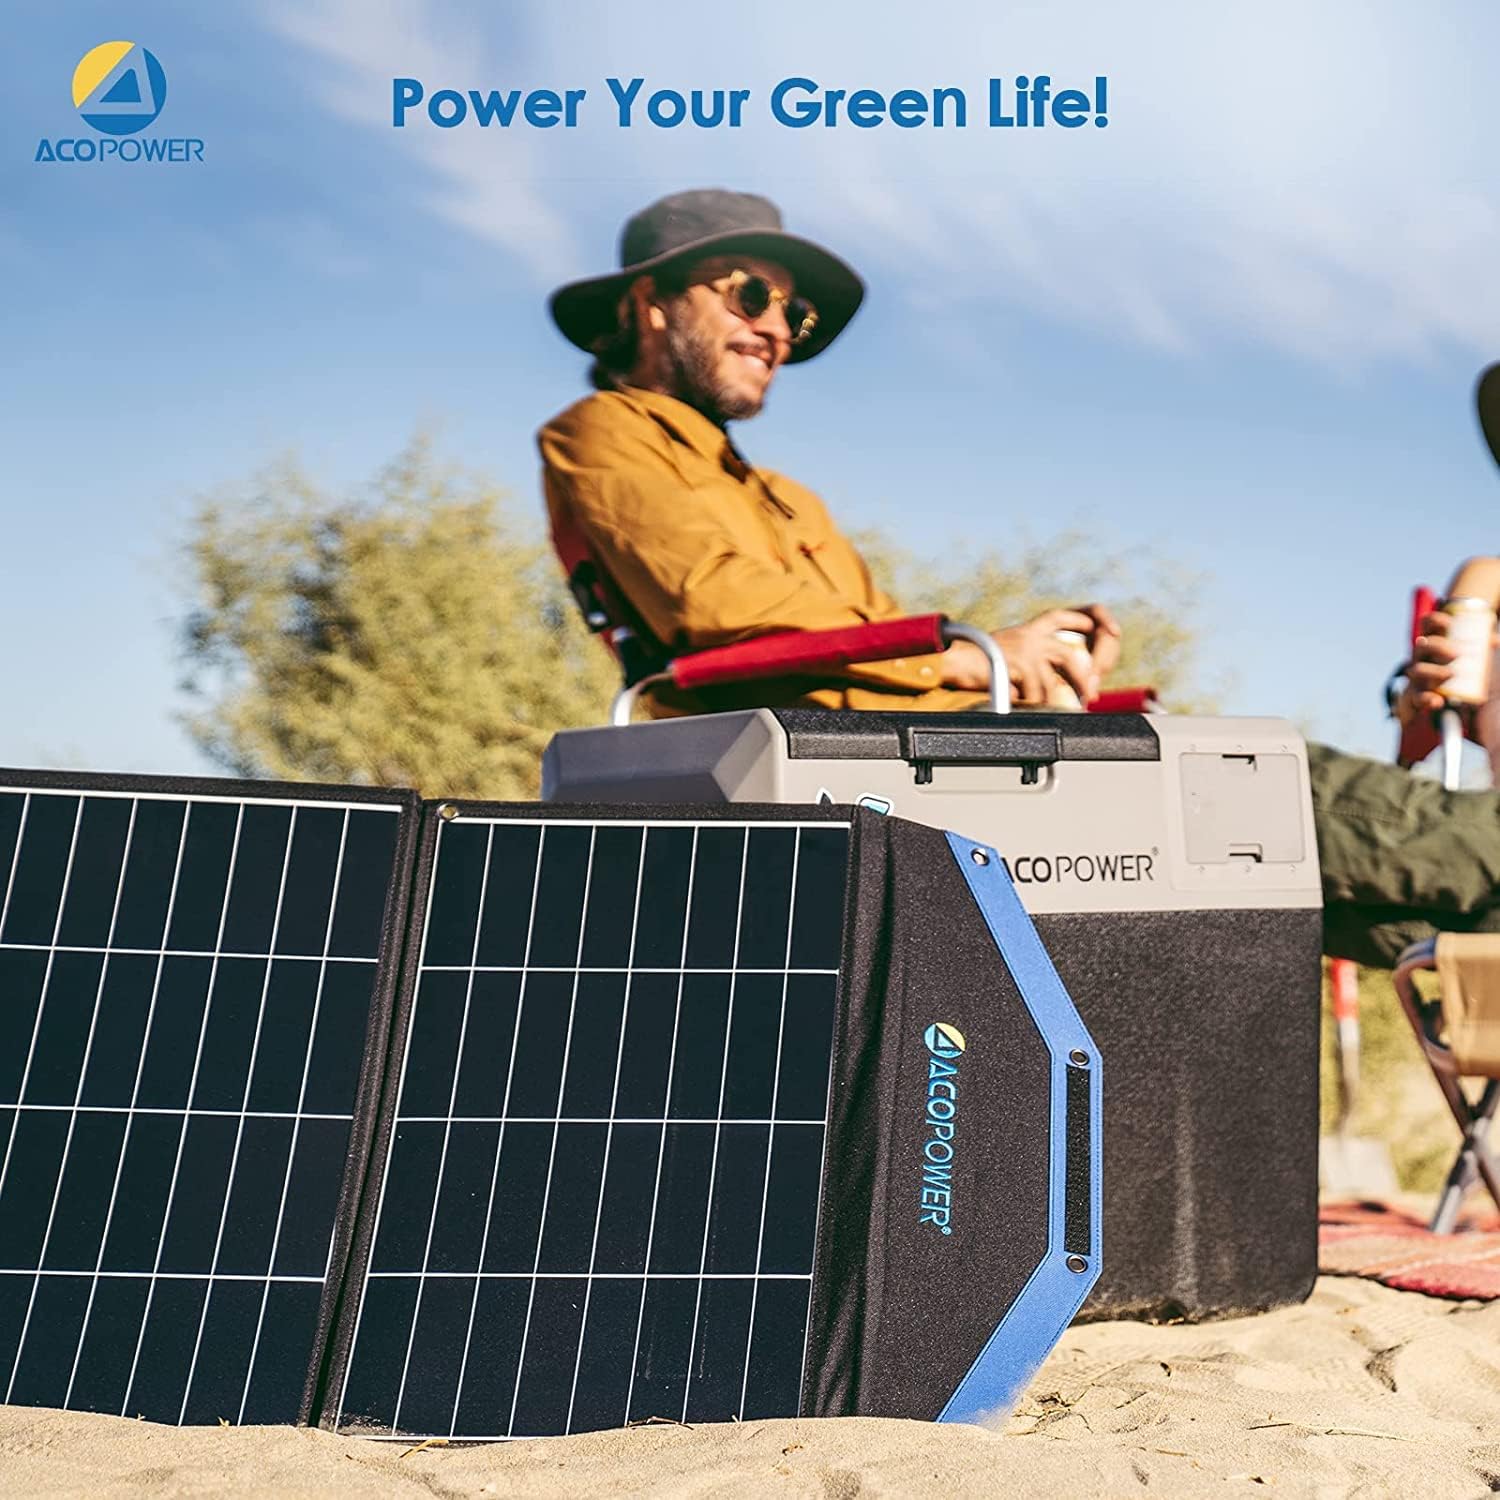 Acopower Solar Cooler With Solar Panel